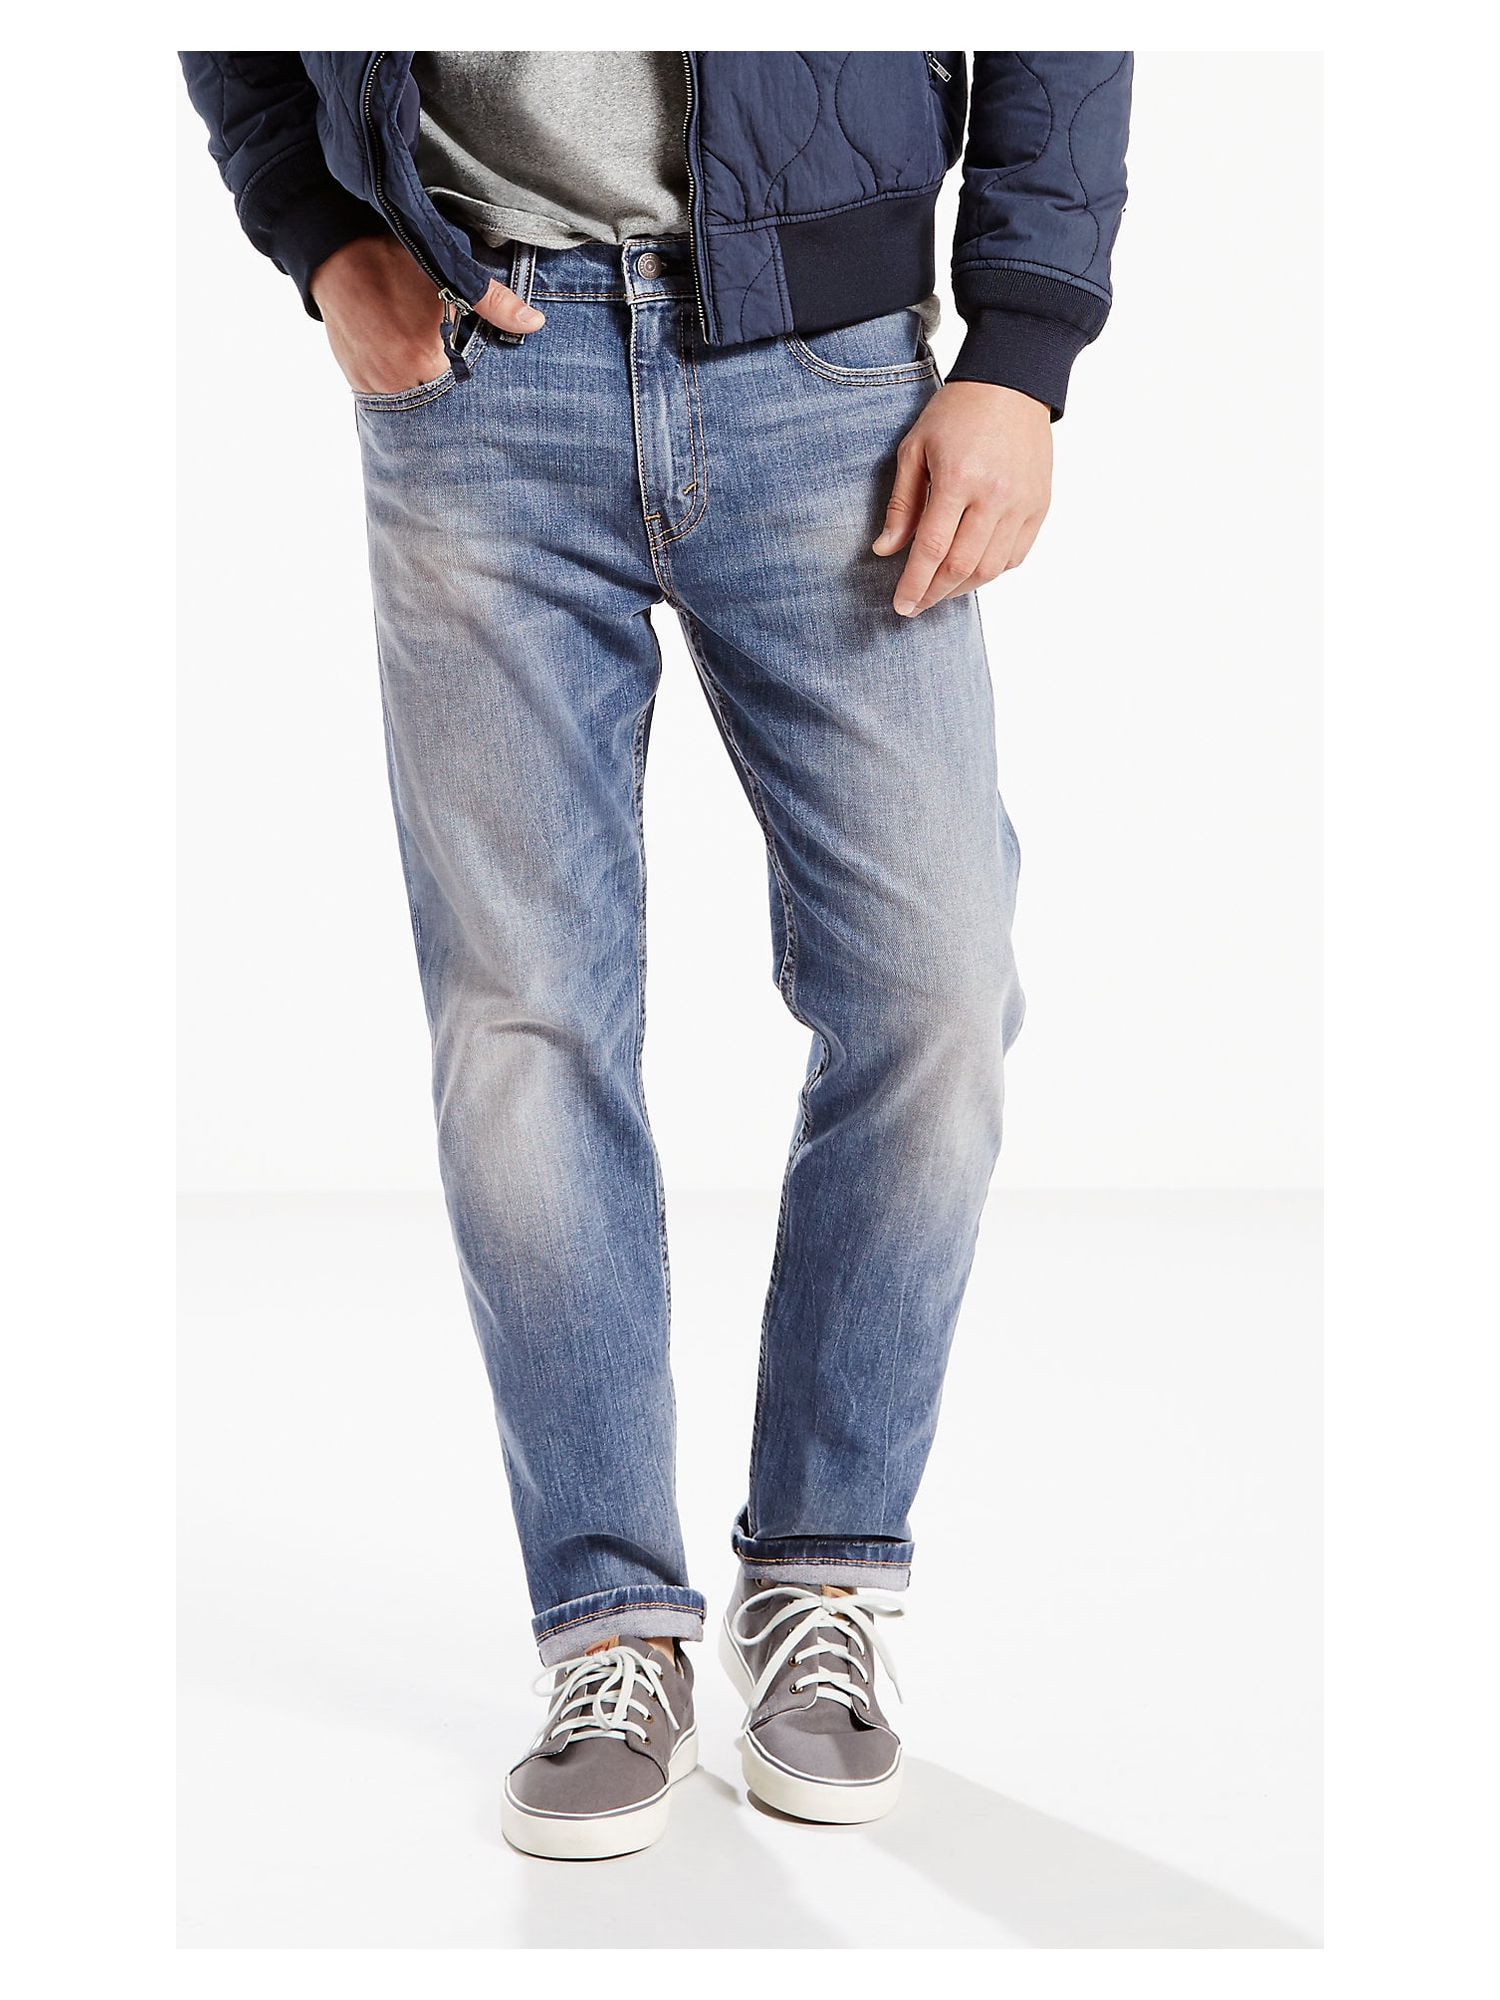 Levi's Mens 502 Regular Fit Stretch Tapered Jeans - image 1 of 7